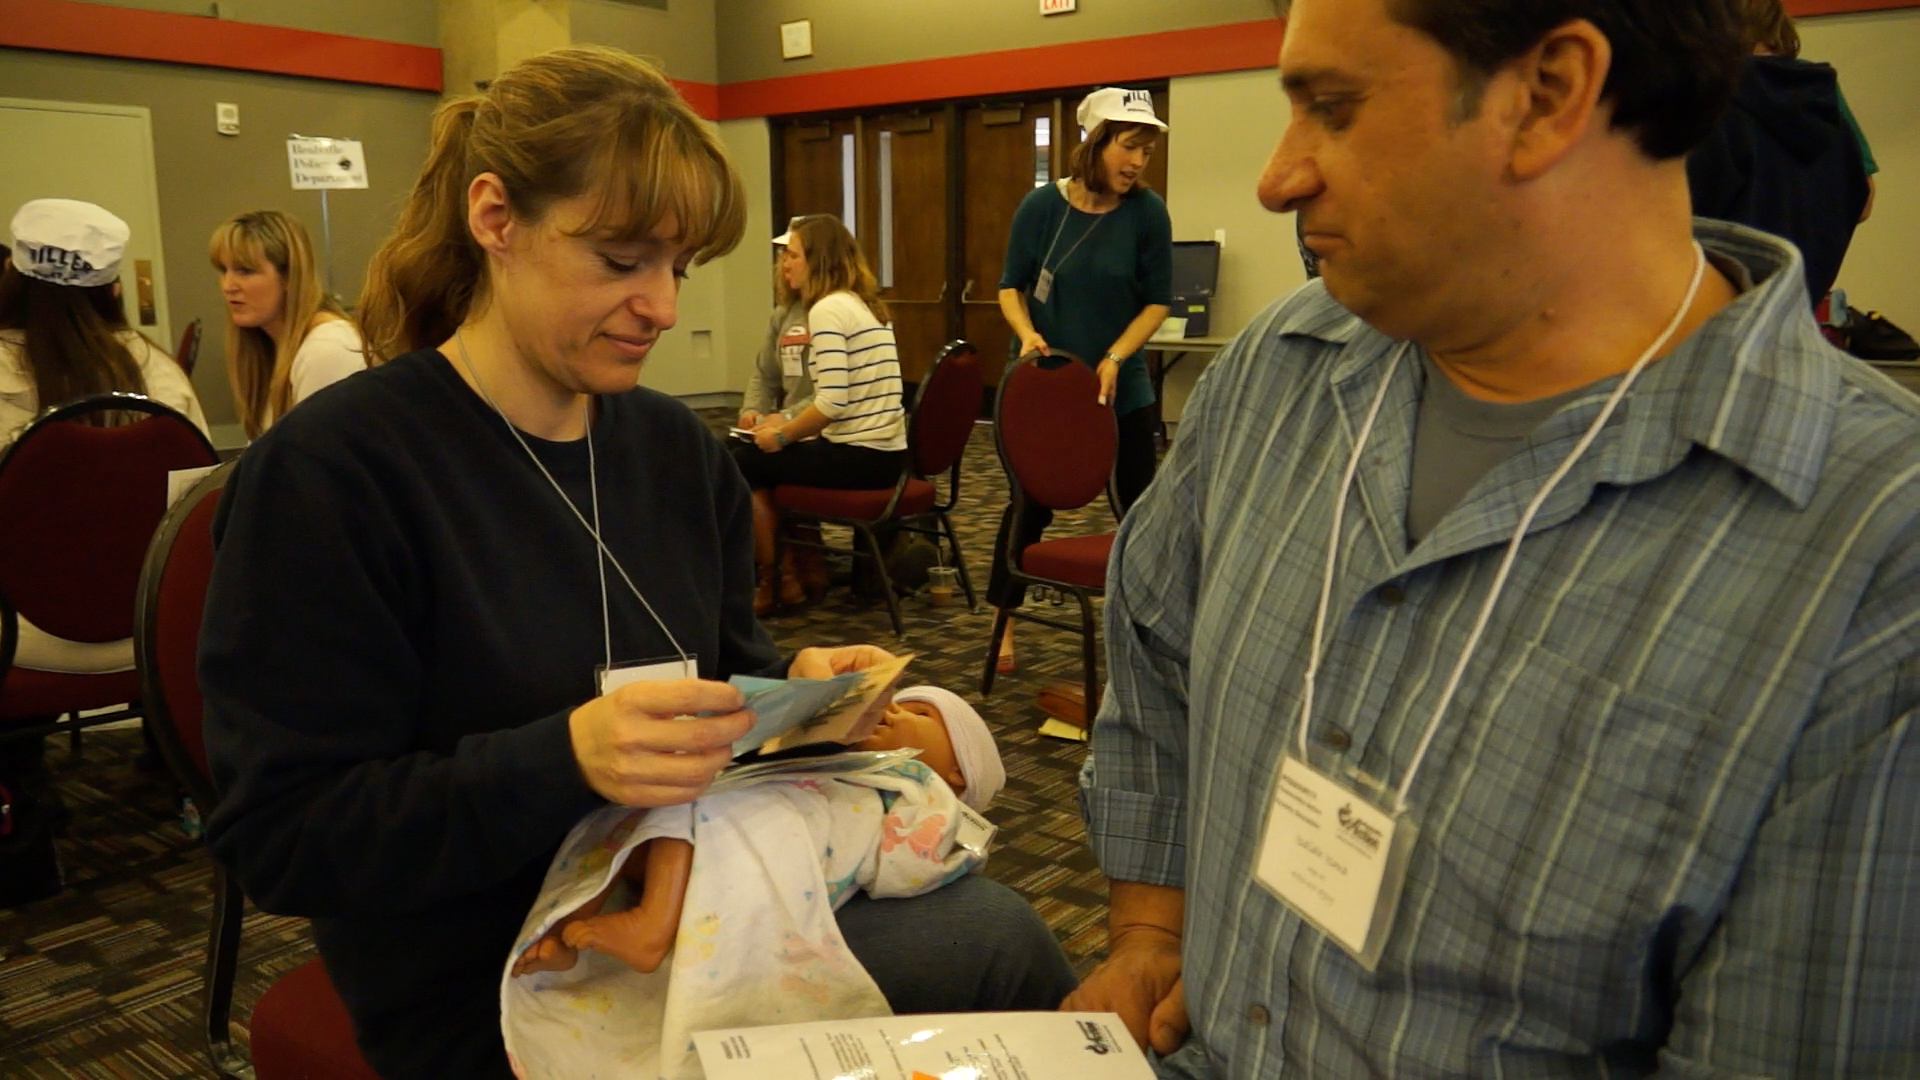 Woman and Man role play as a mother and father in a poverty simulation